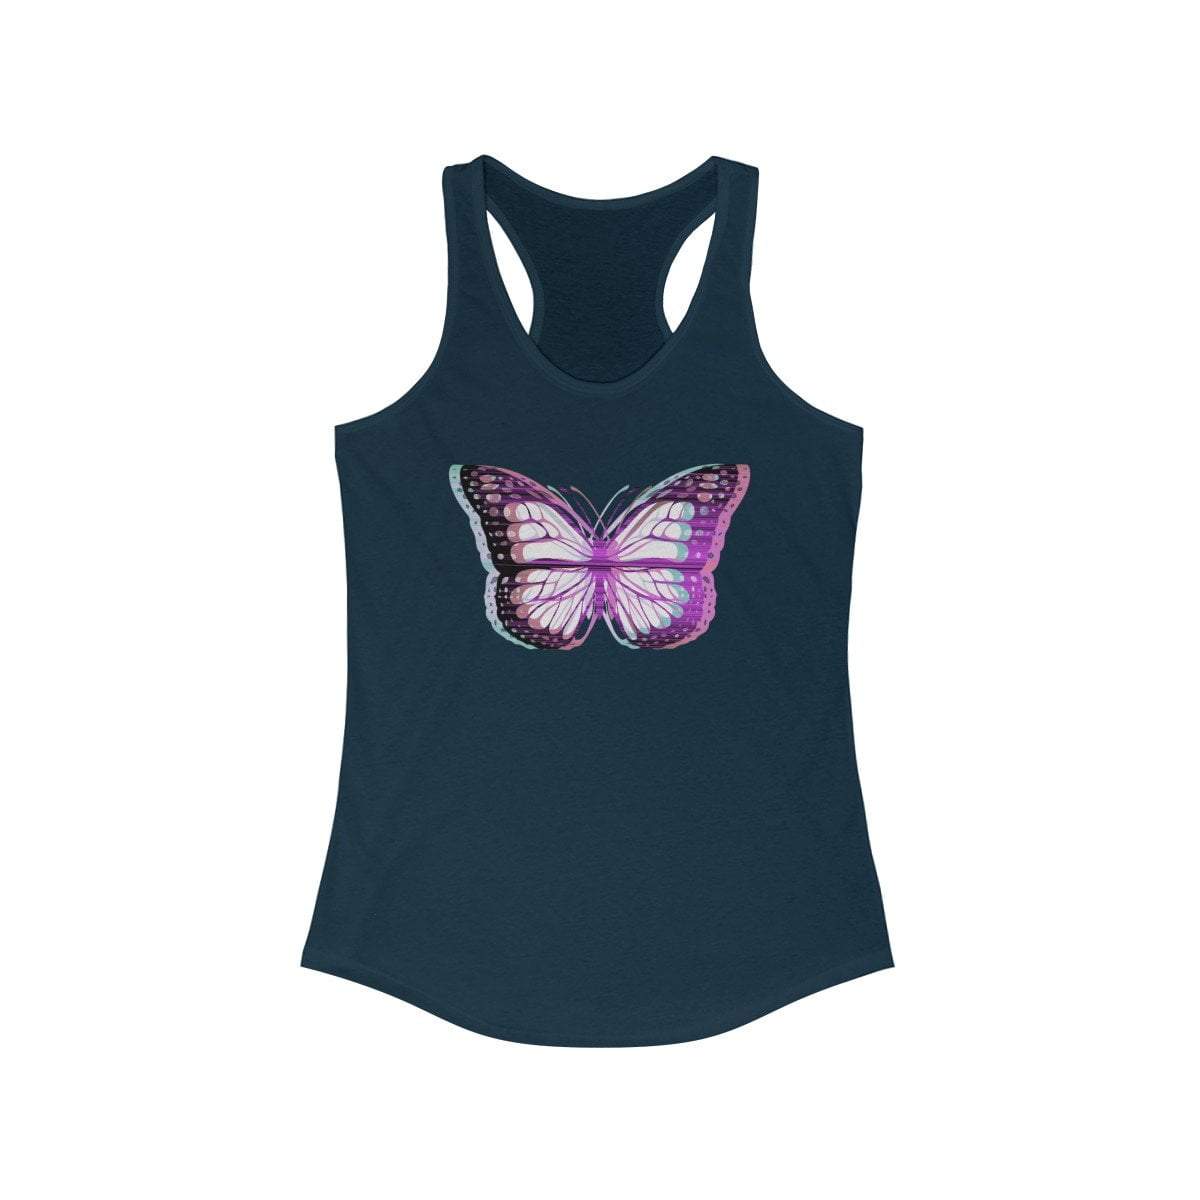 Printify Tank Top Solid Midnight Navy / XS UV Glitchy Butterfly Racerback Tank Top - White